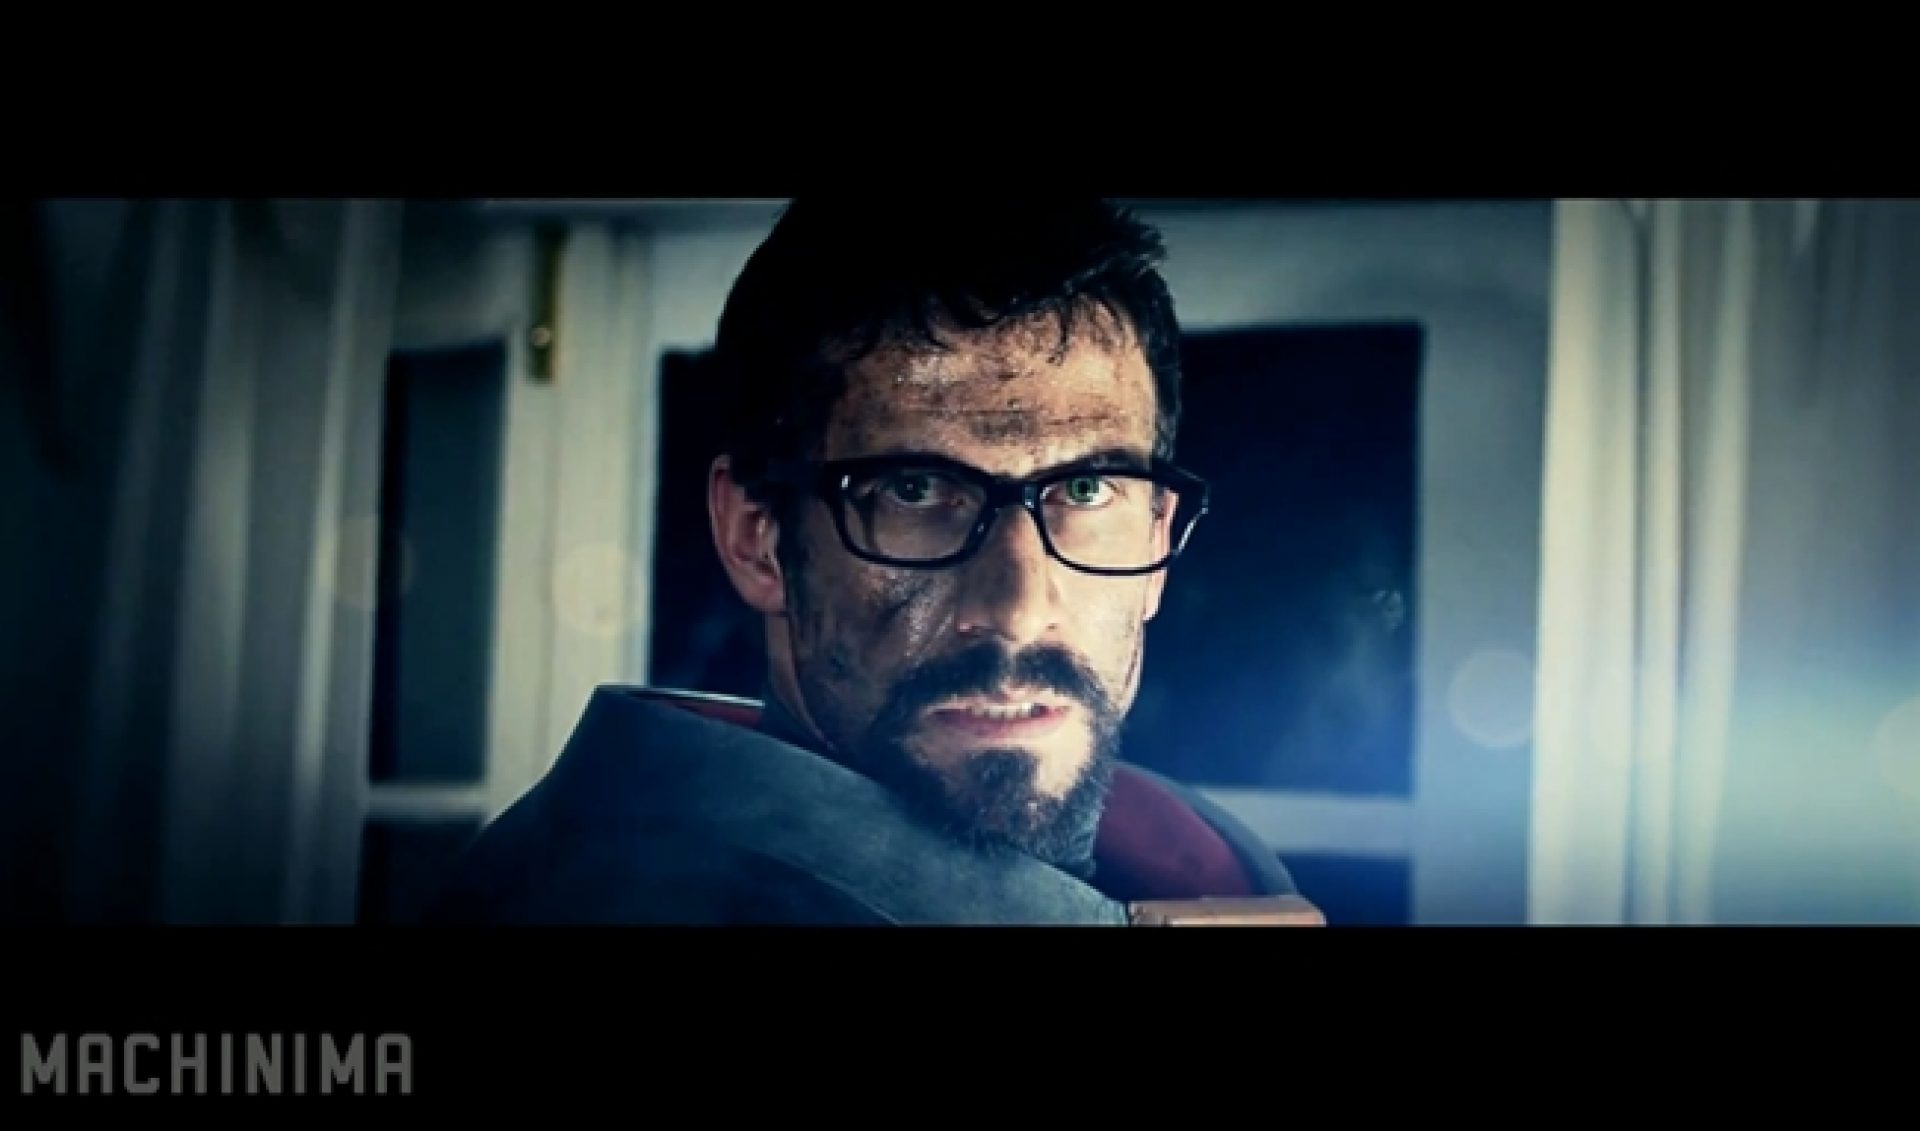 There’s A Gritty ‘Half-Life’ Web Series Raising Money On Indiegogo